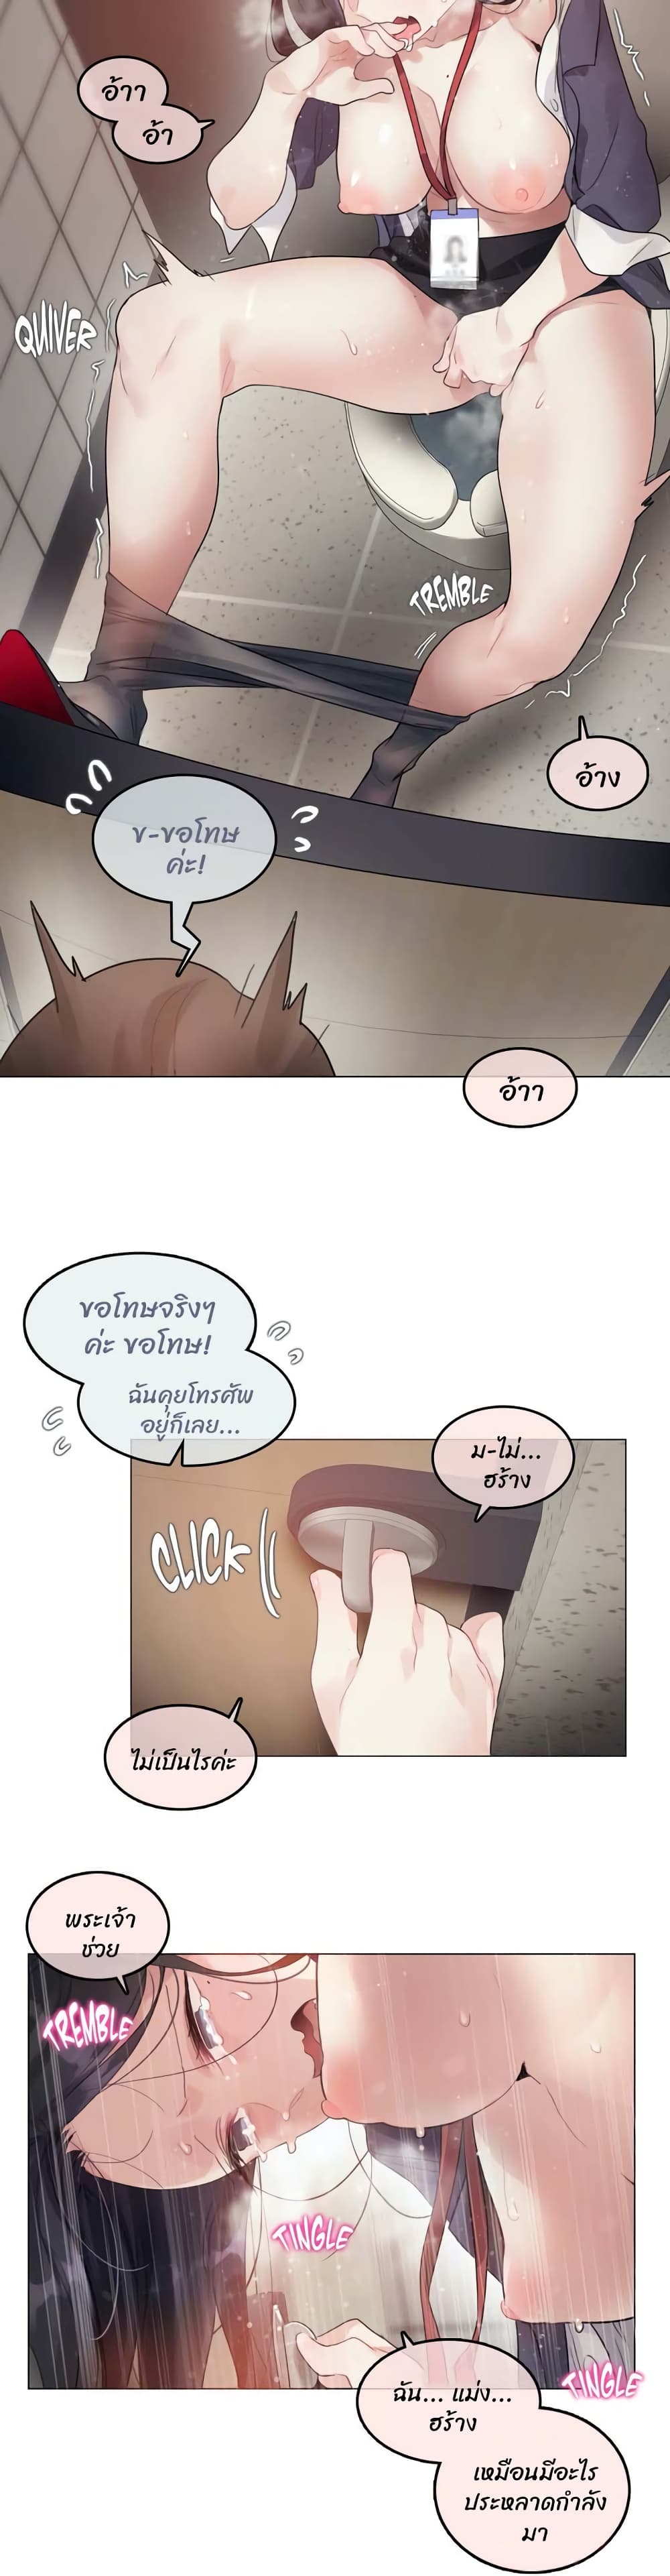 A Pervert's Daily Life 95 (18)